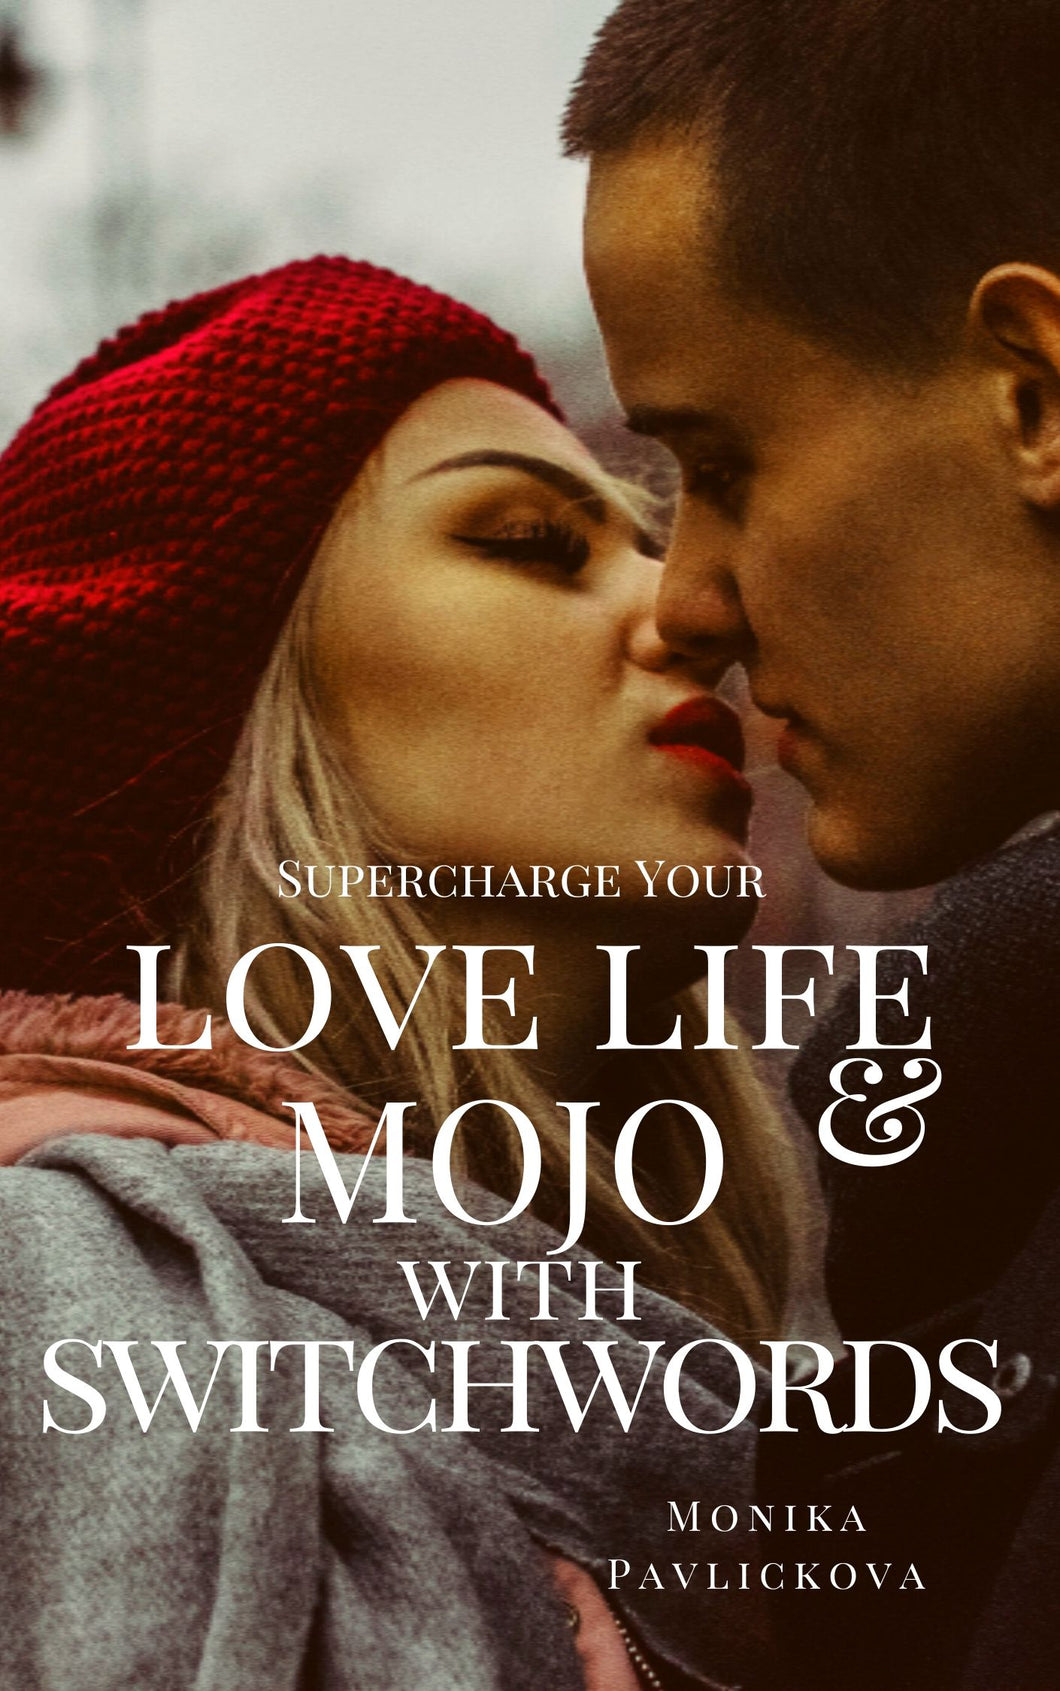 Supercharge Your Love Life & Mojo with Switchwords!: Become Love Magnet with Switchwords! (Switchwords Miracles Book 4) - Monika Pavlickova